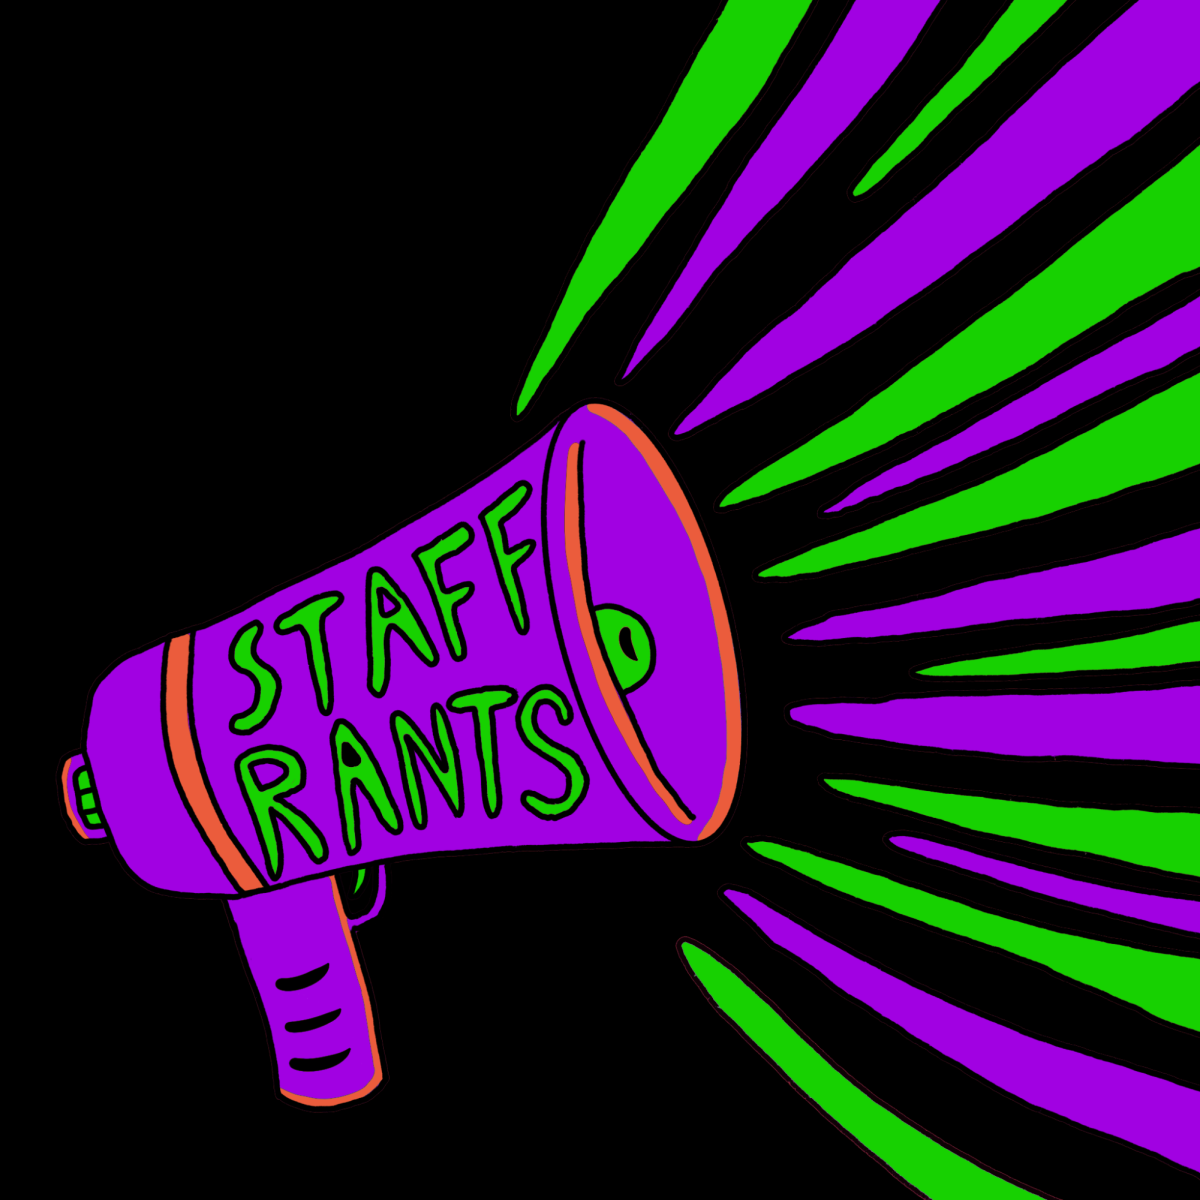 An illustration of a purple and orange megaphone that reads ‘STAFF RANTS’ in green letters. There are purple and green lines coming out of the megaphone. The background is black.